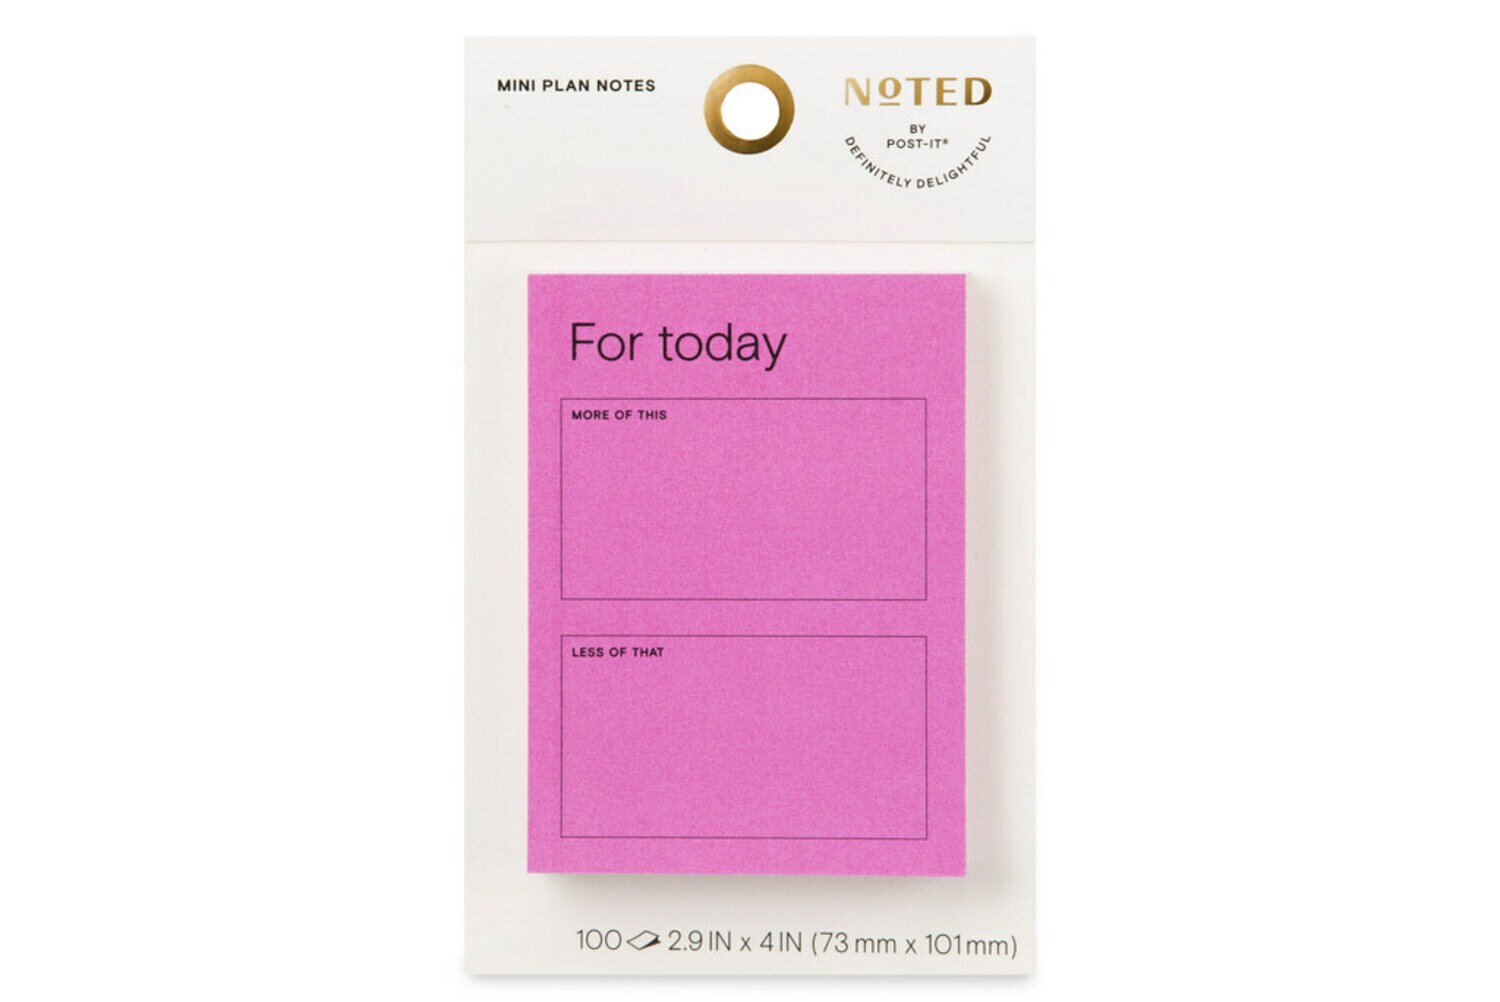 Post-it Super Sticky Large Notes Oasis Color Collection, Pack of 3 Pads, 70  Sheets per Pad,101 mm x 101 mm, Blue, Green - Extra Sticky Notes for Note